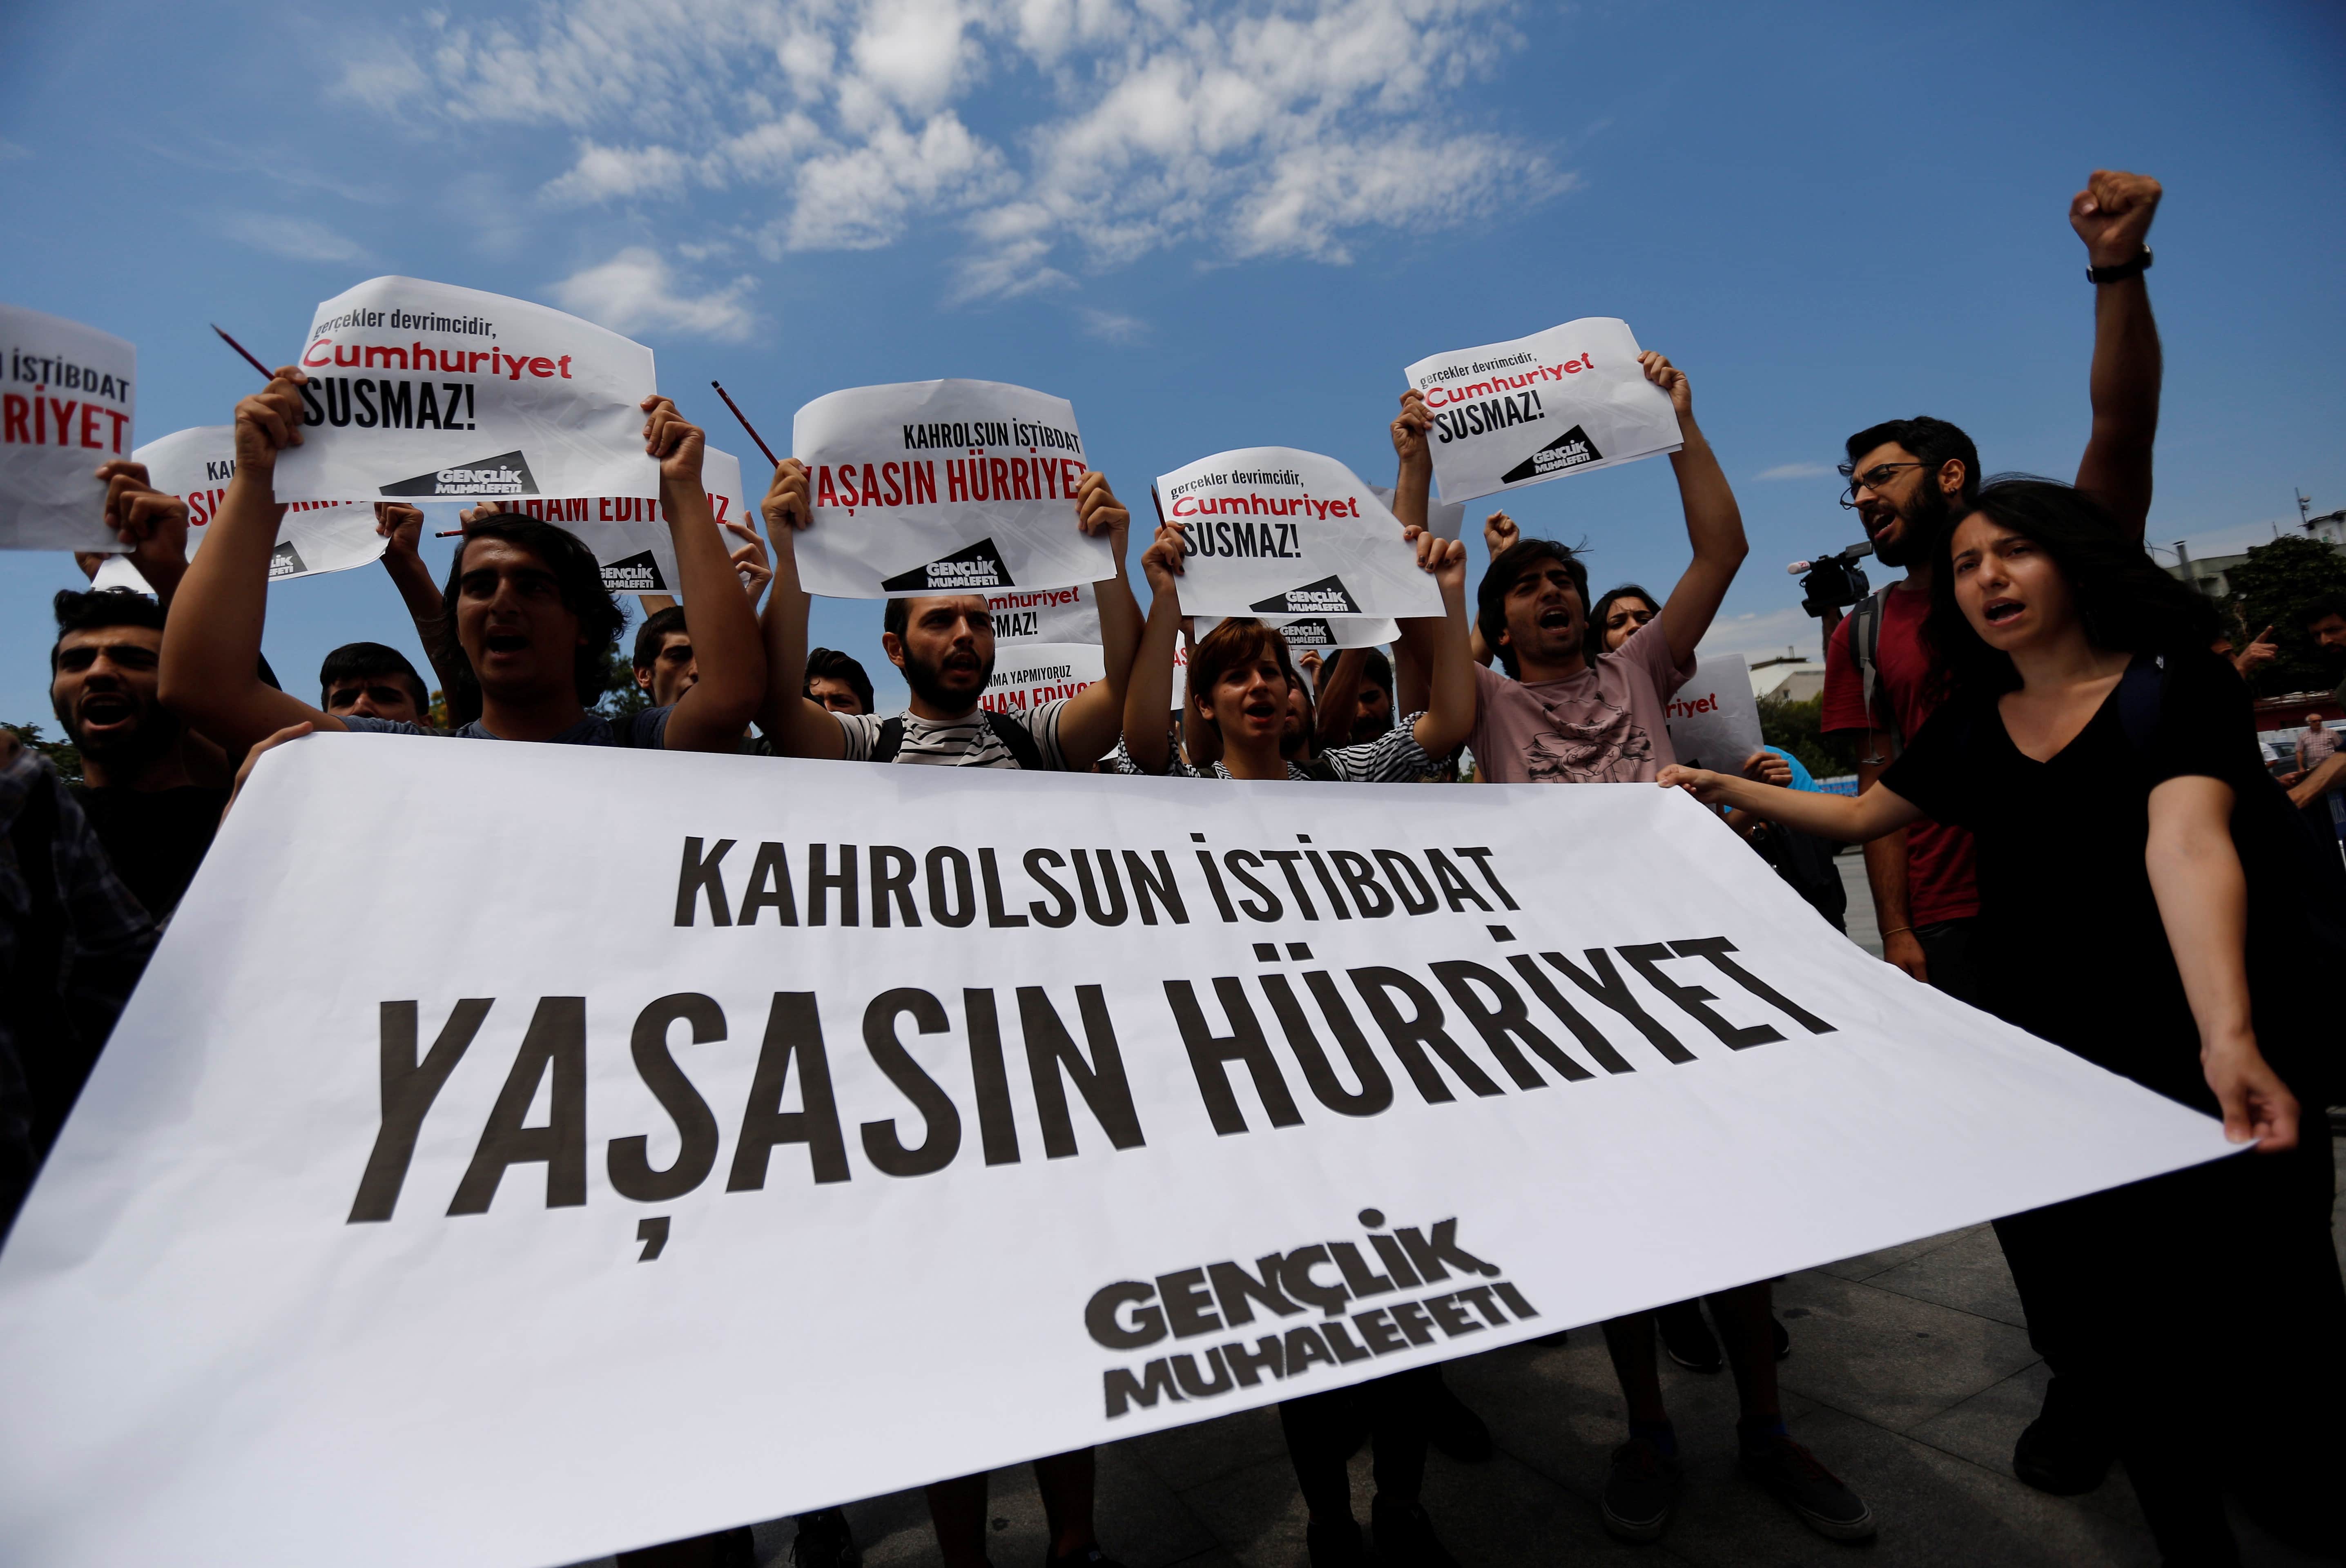 Press freedom activists hold a demonstration in solidarity with the jailed members of "Cumhuriyet" outside a courthouse, in Istanbul, Turkey, 28 July 2017. The banner reads: "To hell with despotism. Long live freedom", REUTERS/Murad Sezer